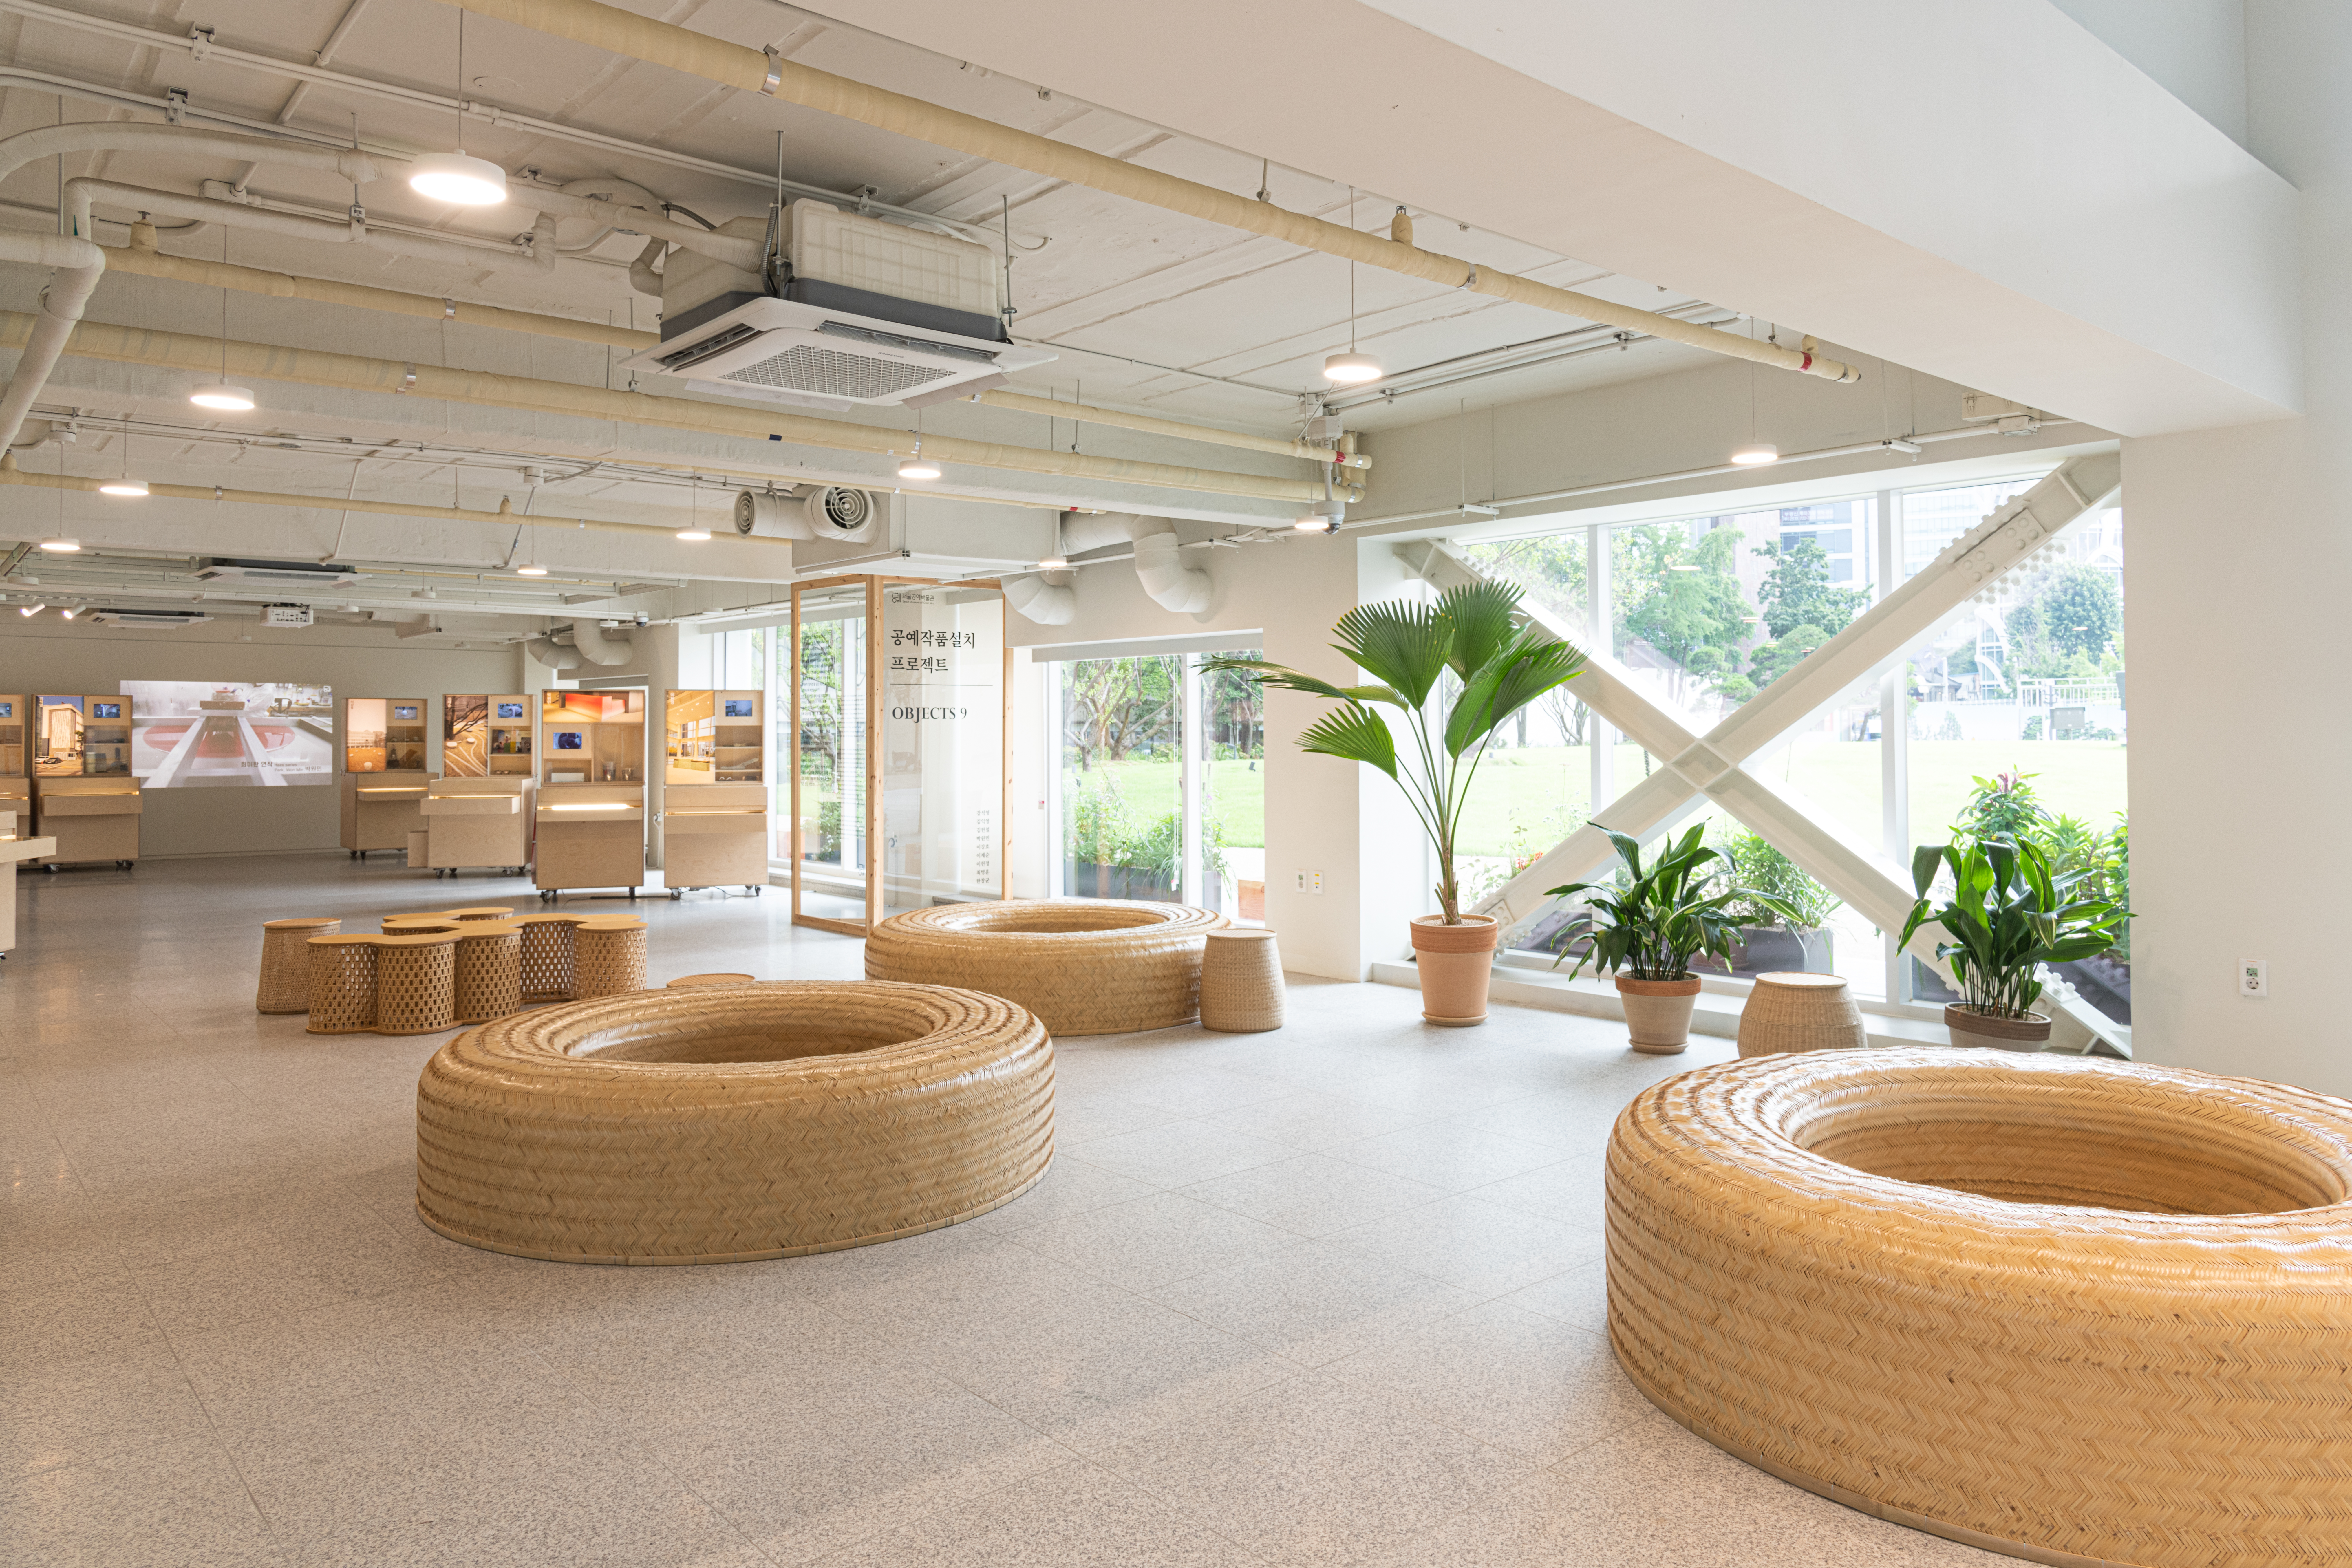 Seoul Museum of Craft Art (SeMoCA)3 : A well-lit relaxing space with several large donut-shaped rattan chairs
